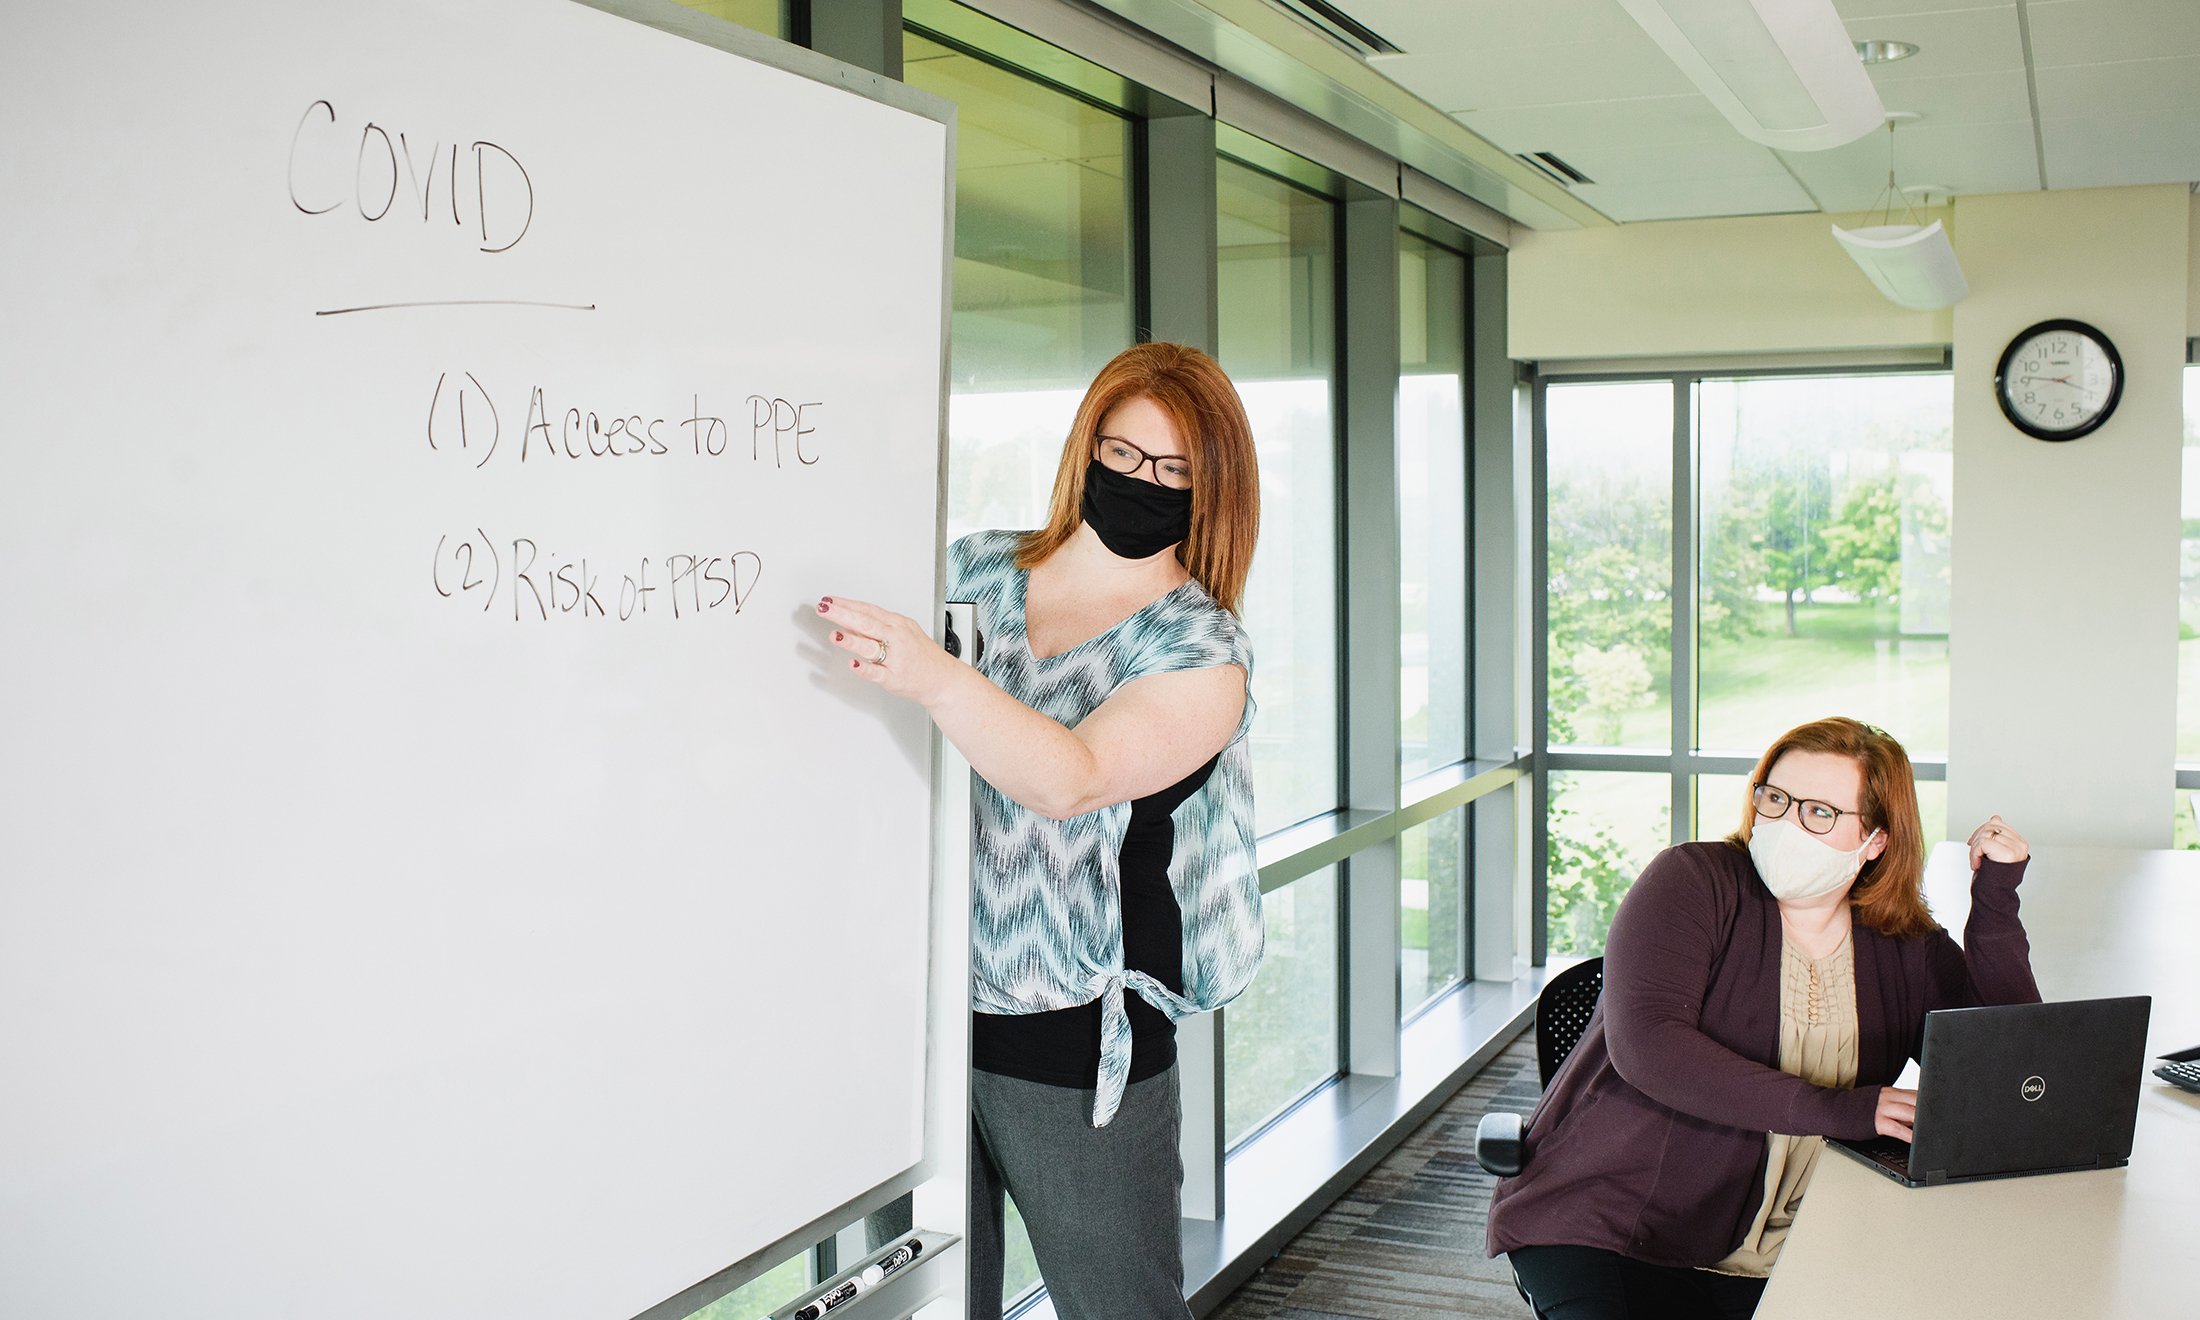 One woman writing on a white board, the other sitting. Both are wearing face masks.